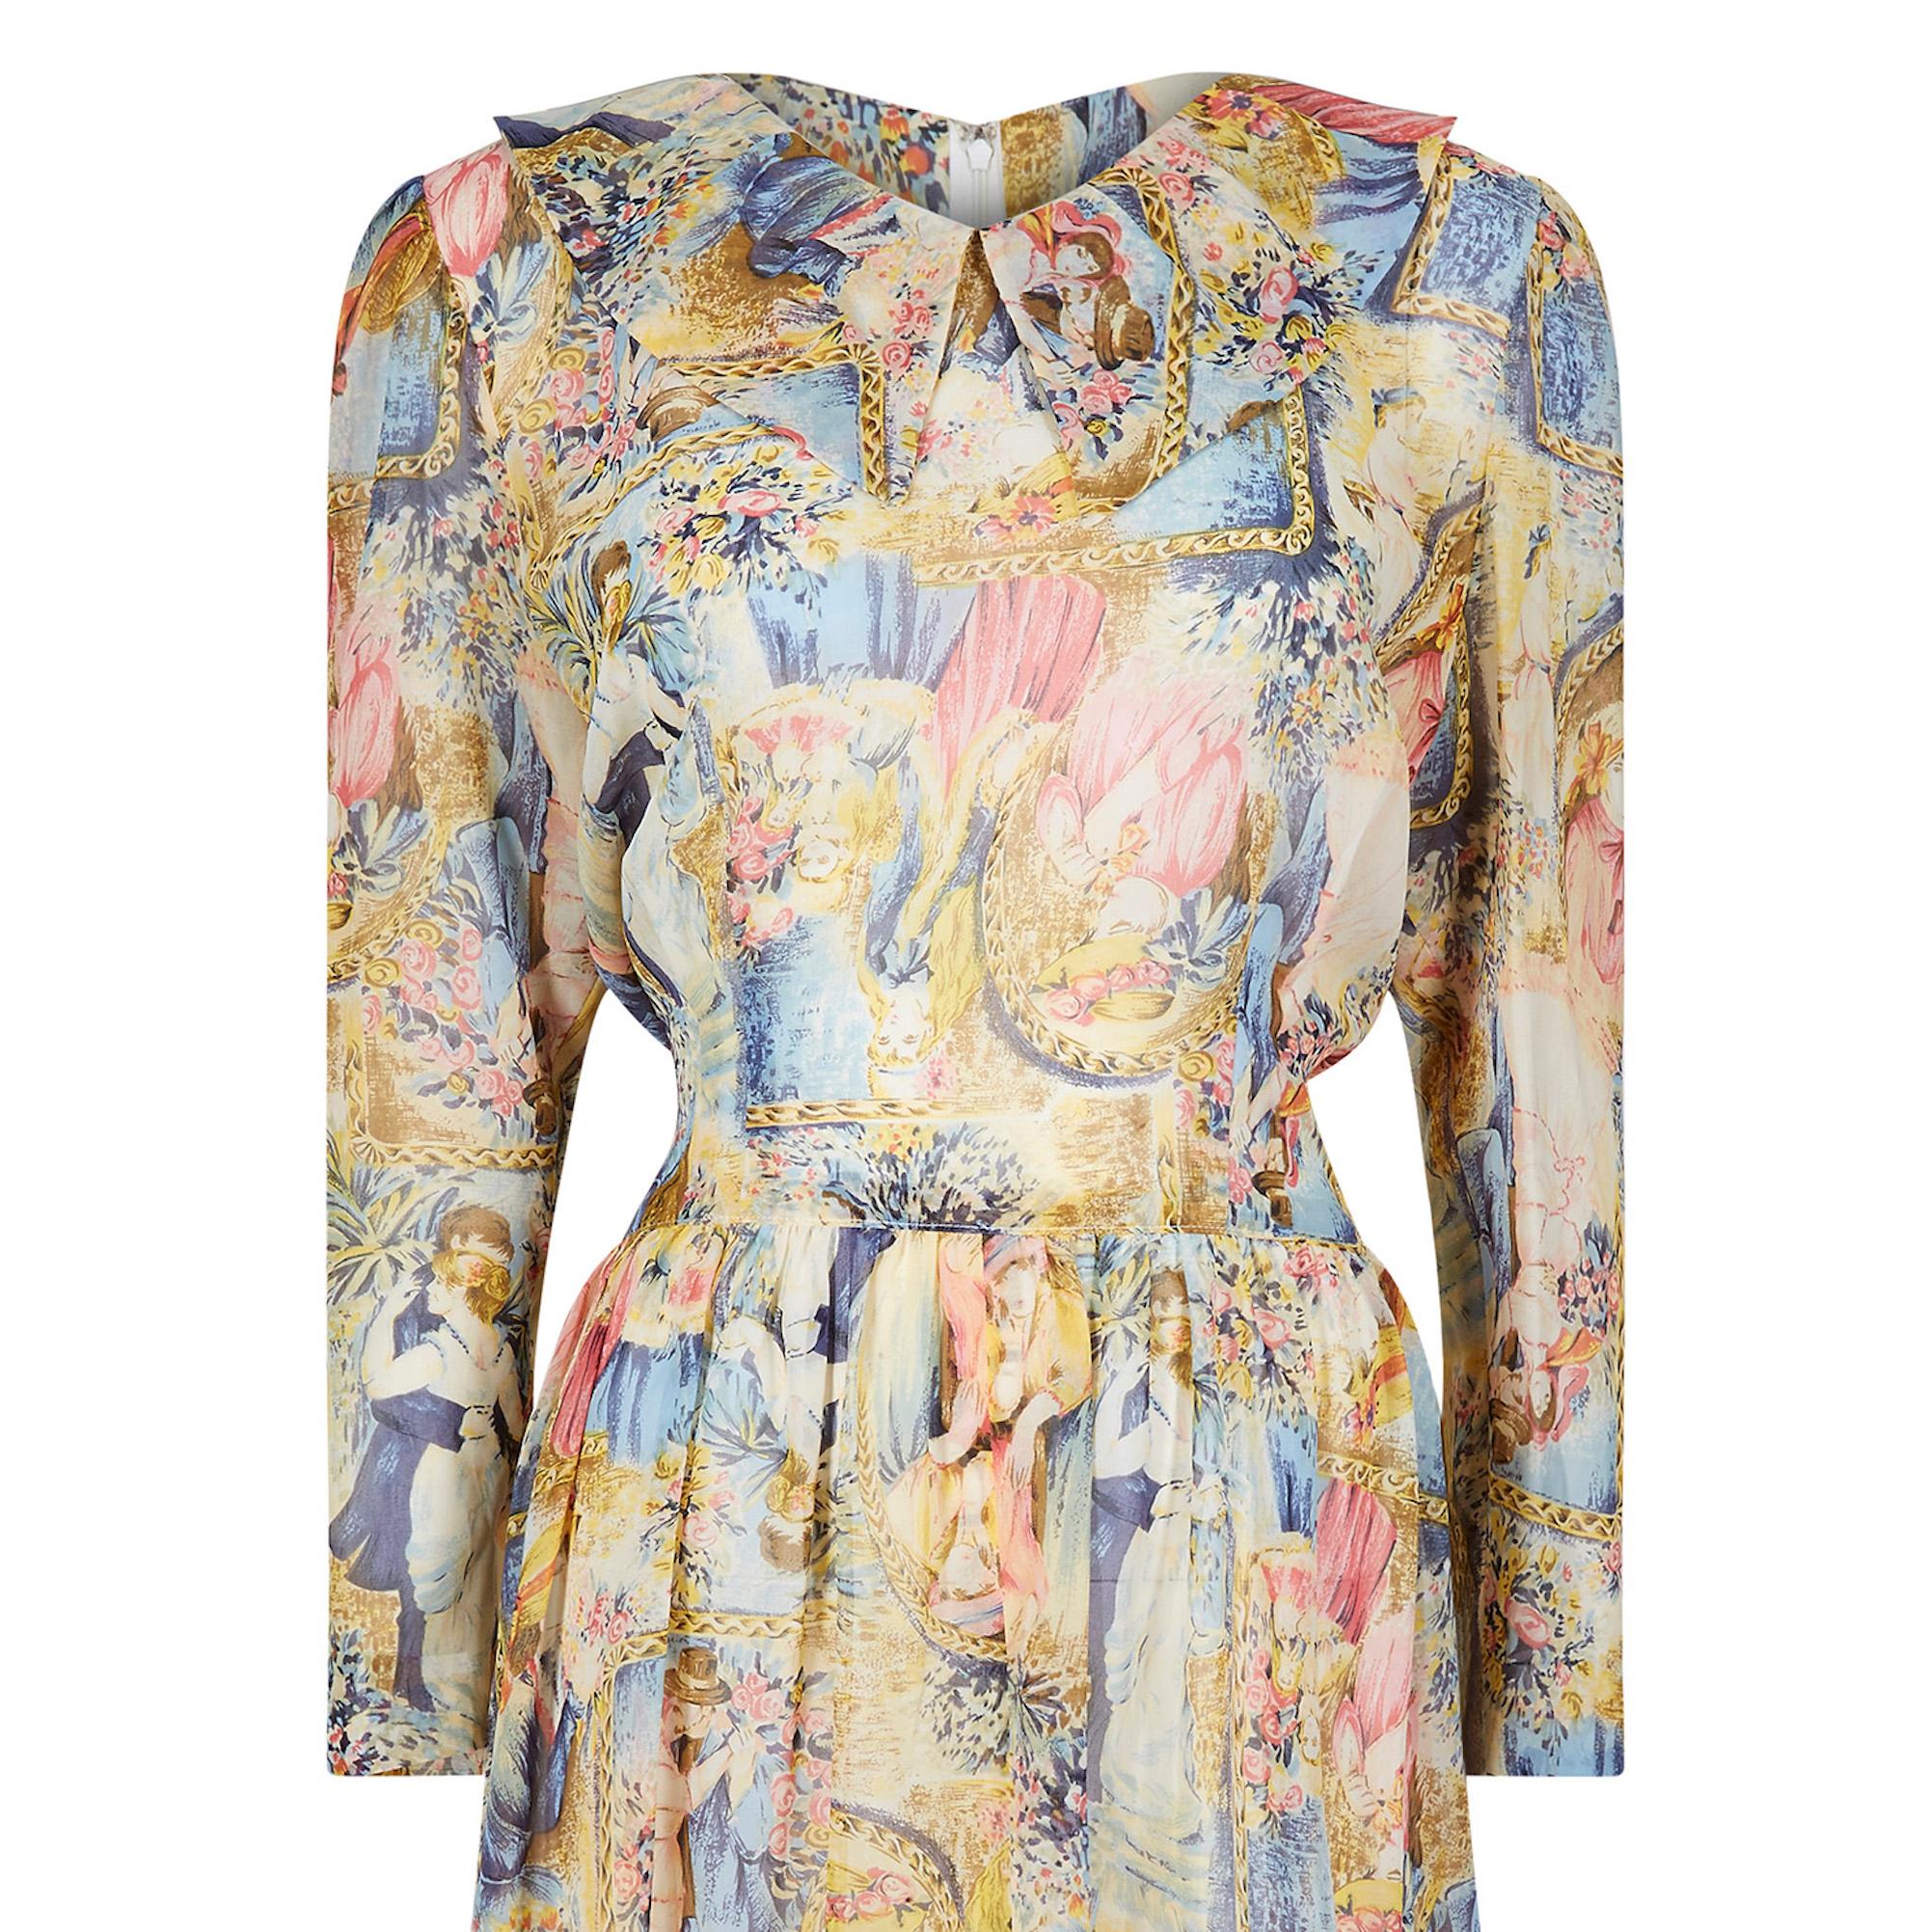 1970s Novelty Printed Chiffon Pastel Shade Dress With Sash Belt In Excellent Condition For Sale In London, GB